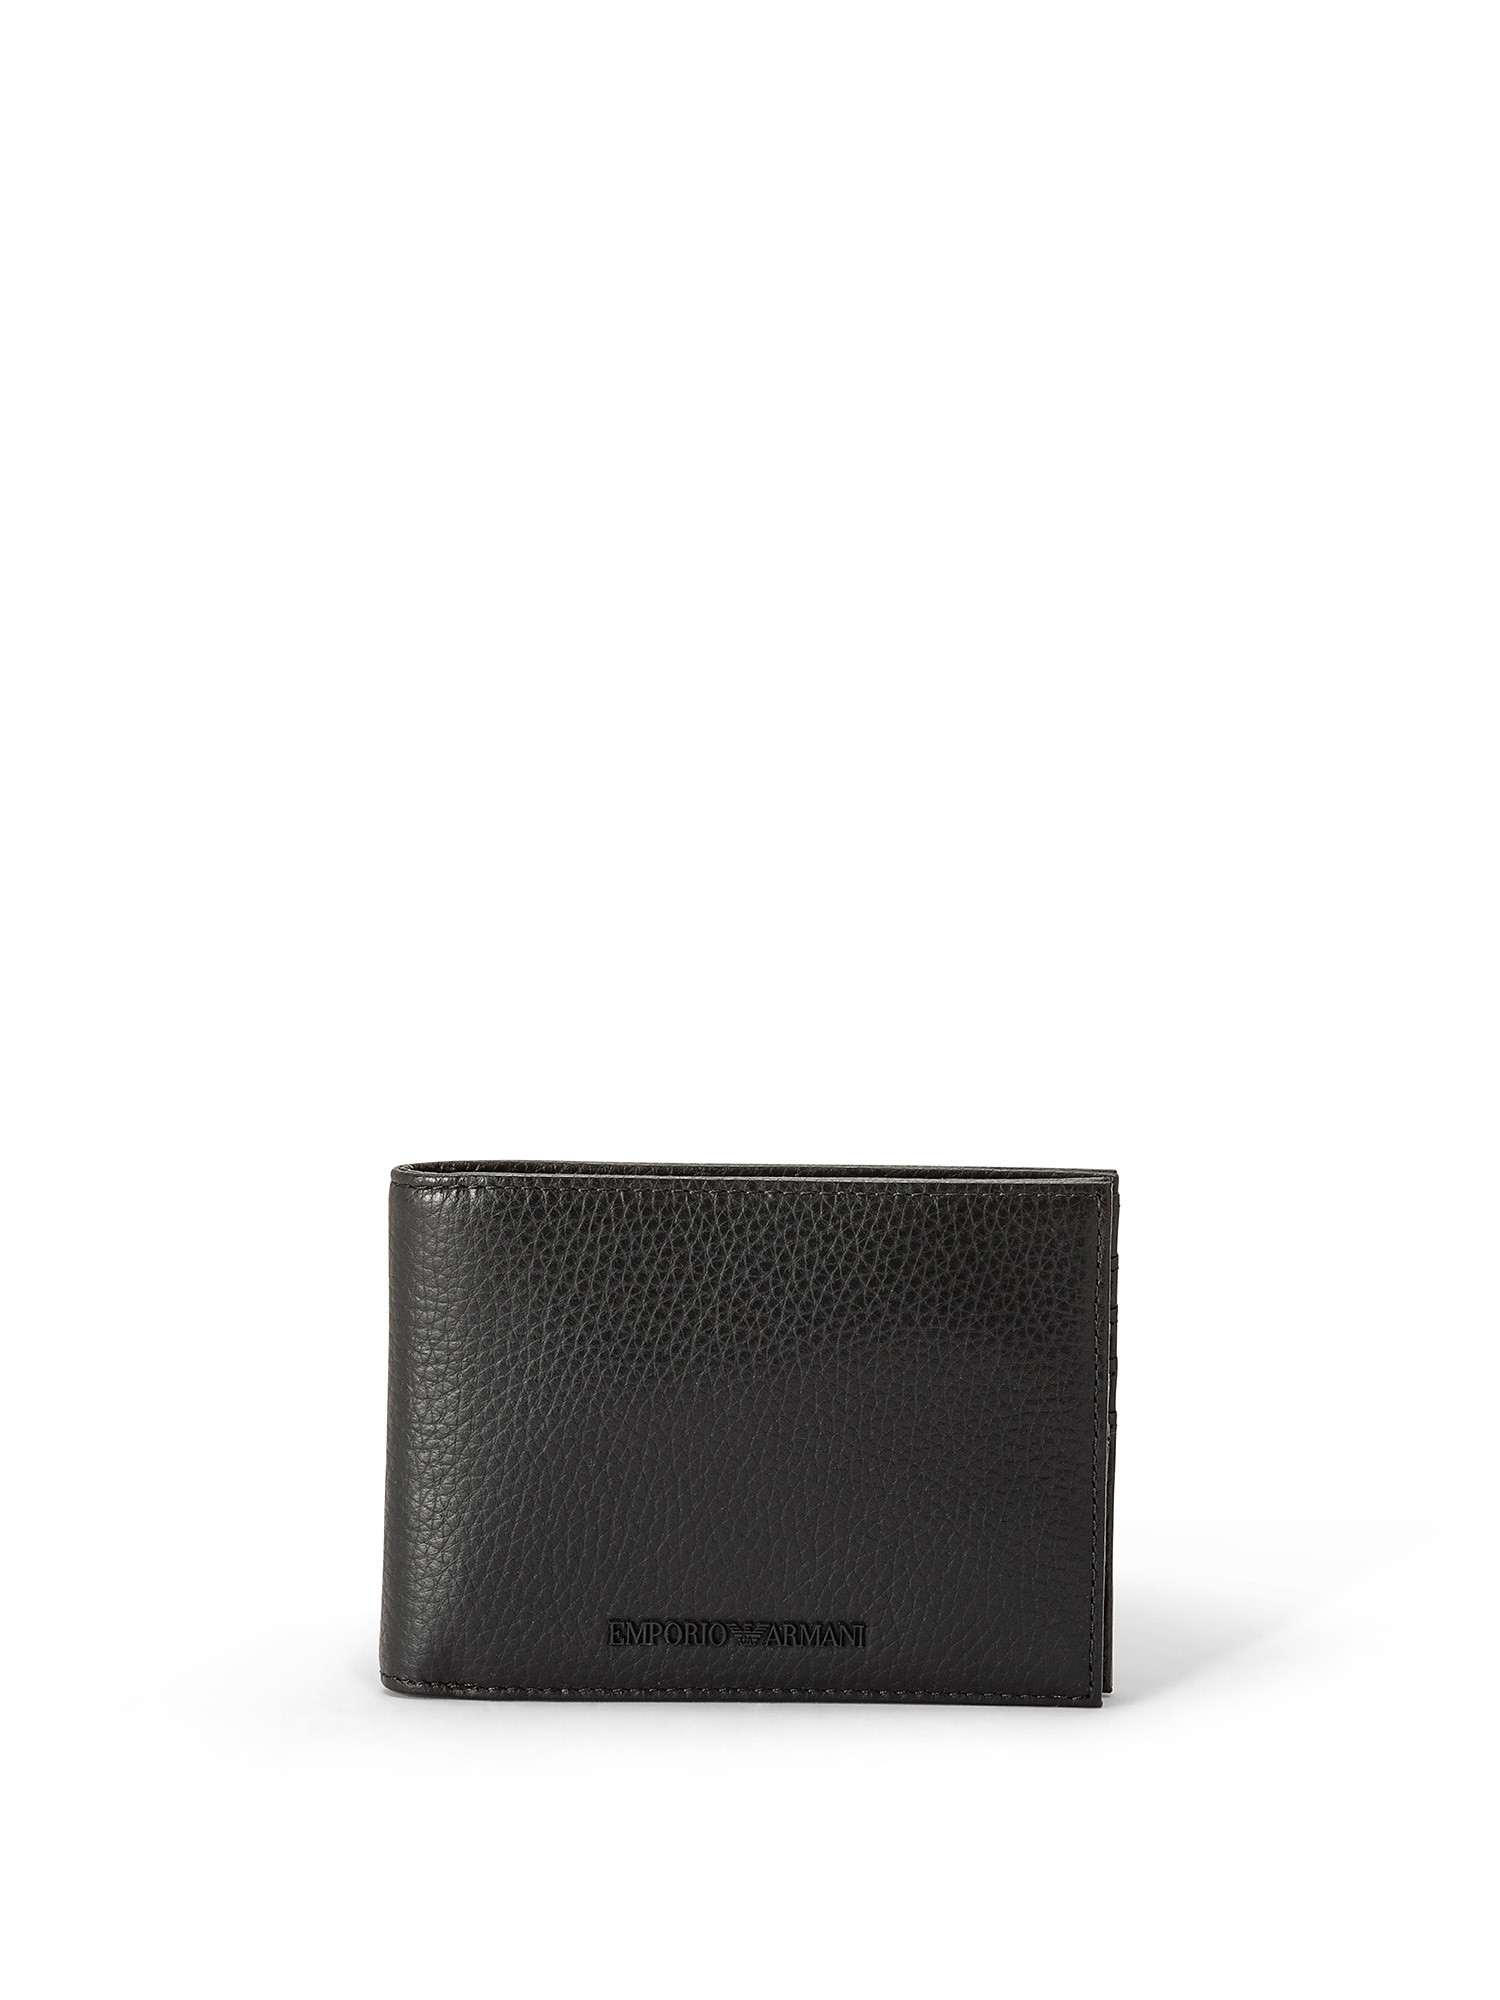 Emporio Armani - Gift box with tumbled leather wallet and key ring, Black, large image number 0